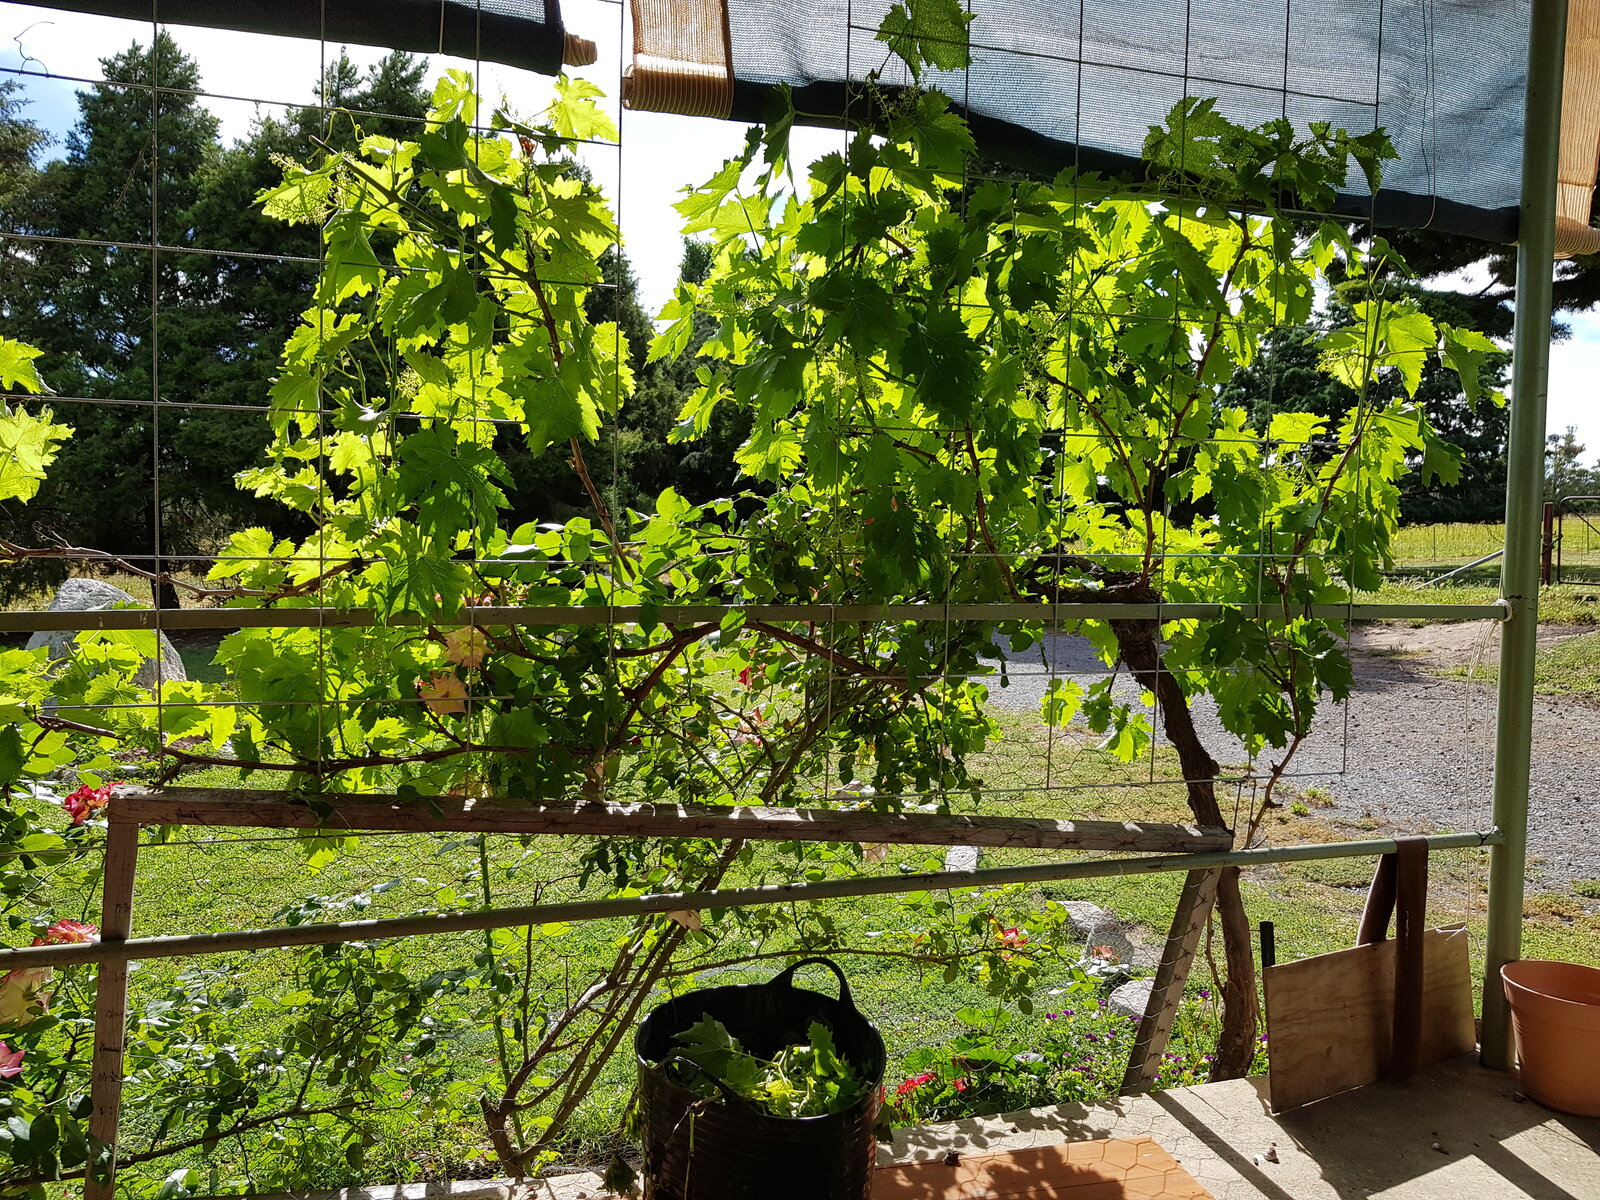 The grape vine acts as a sunshield for the veranda and sitting room